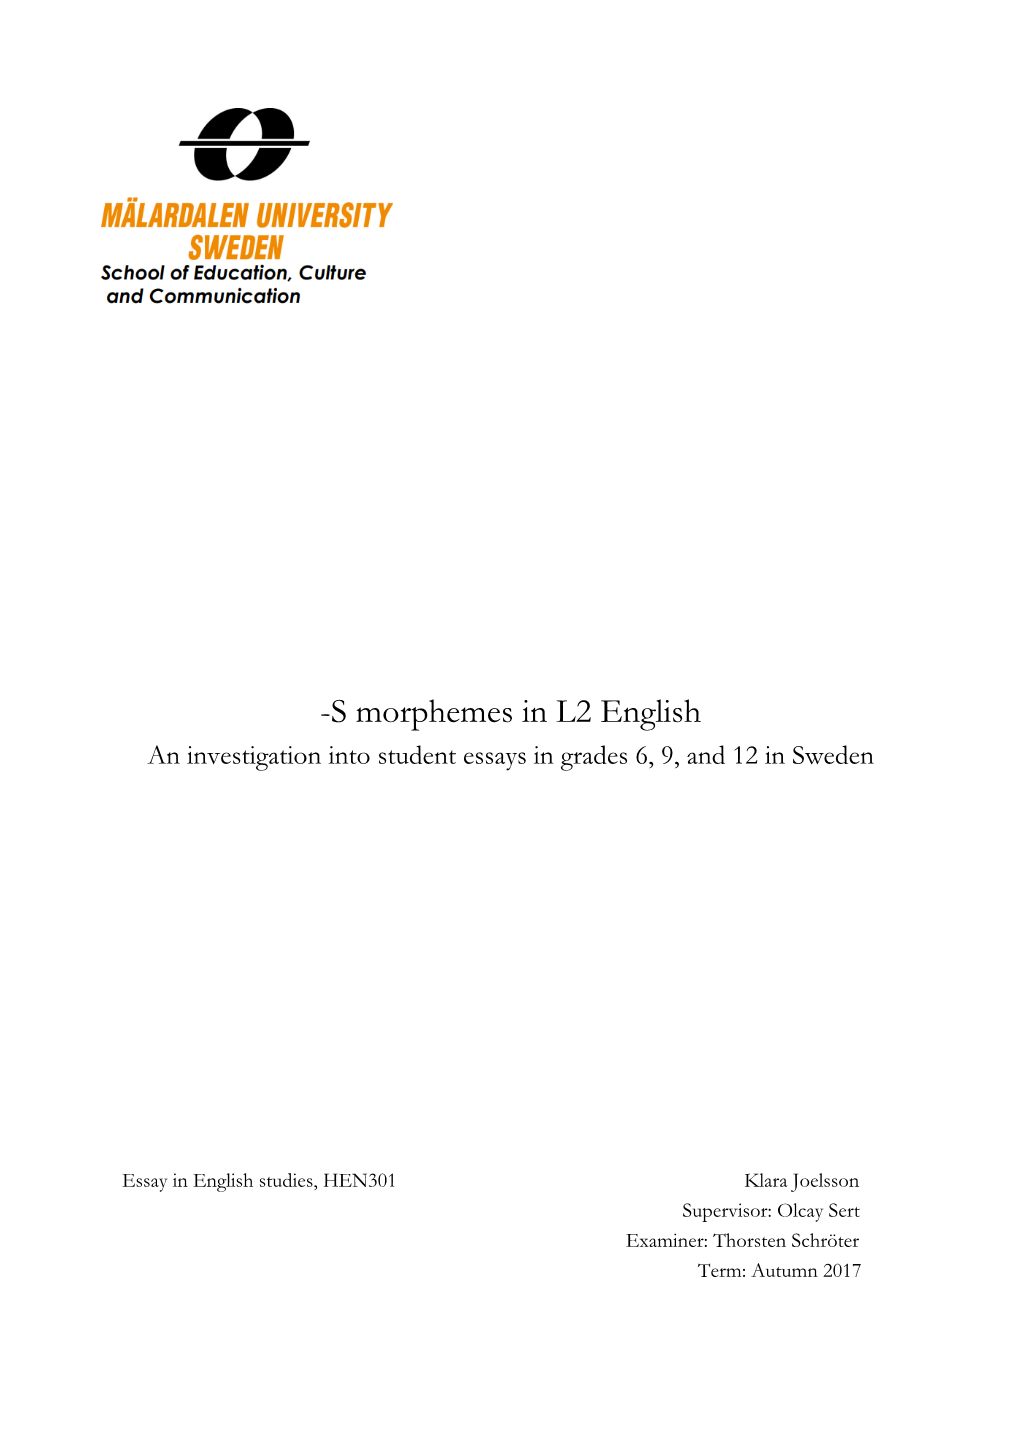 S Morphemes in L2 English an Investigation Into Student Essays in Grades 6, 9, and 12 in Sweden